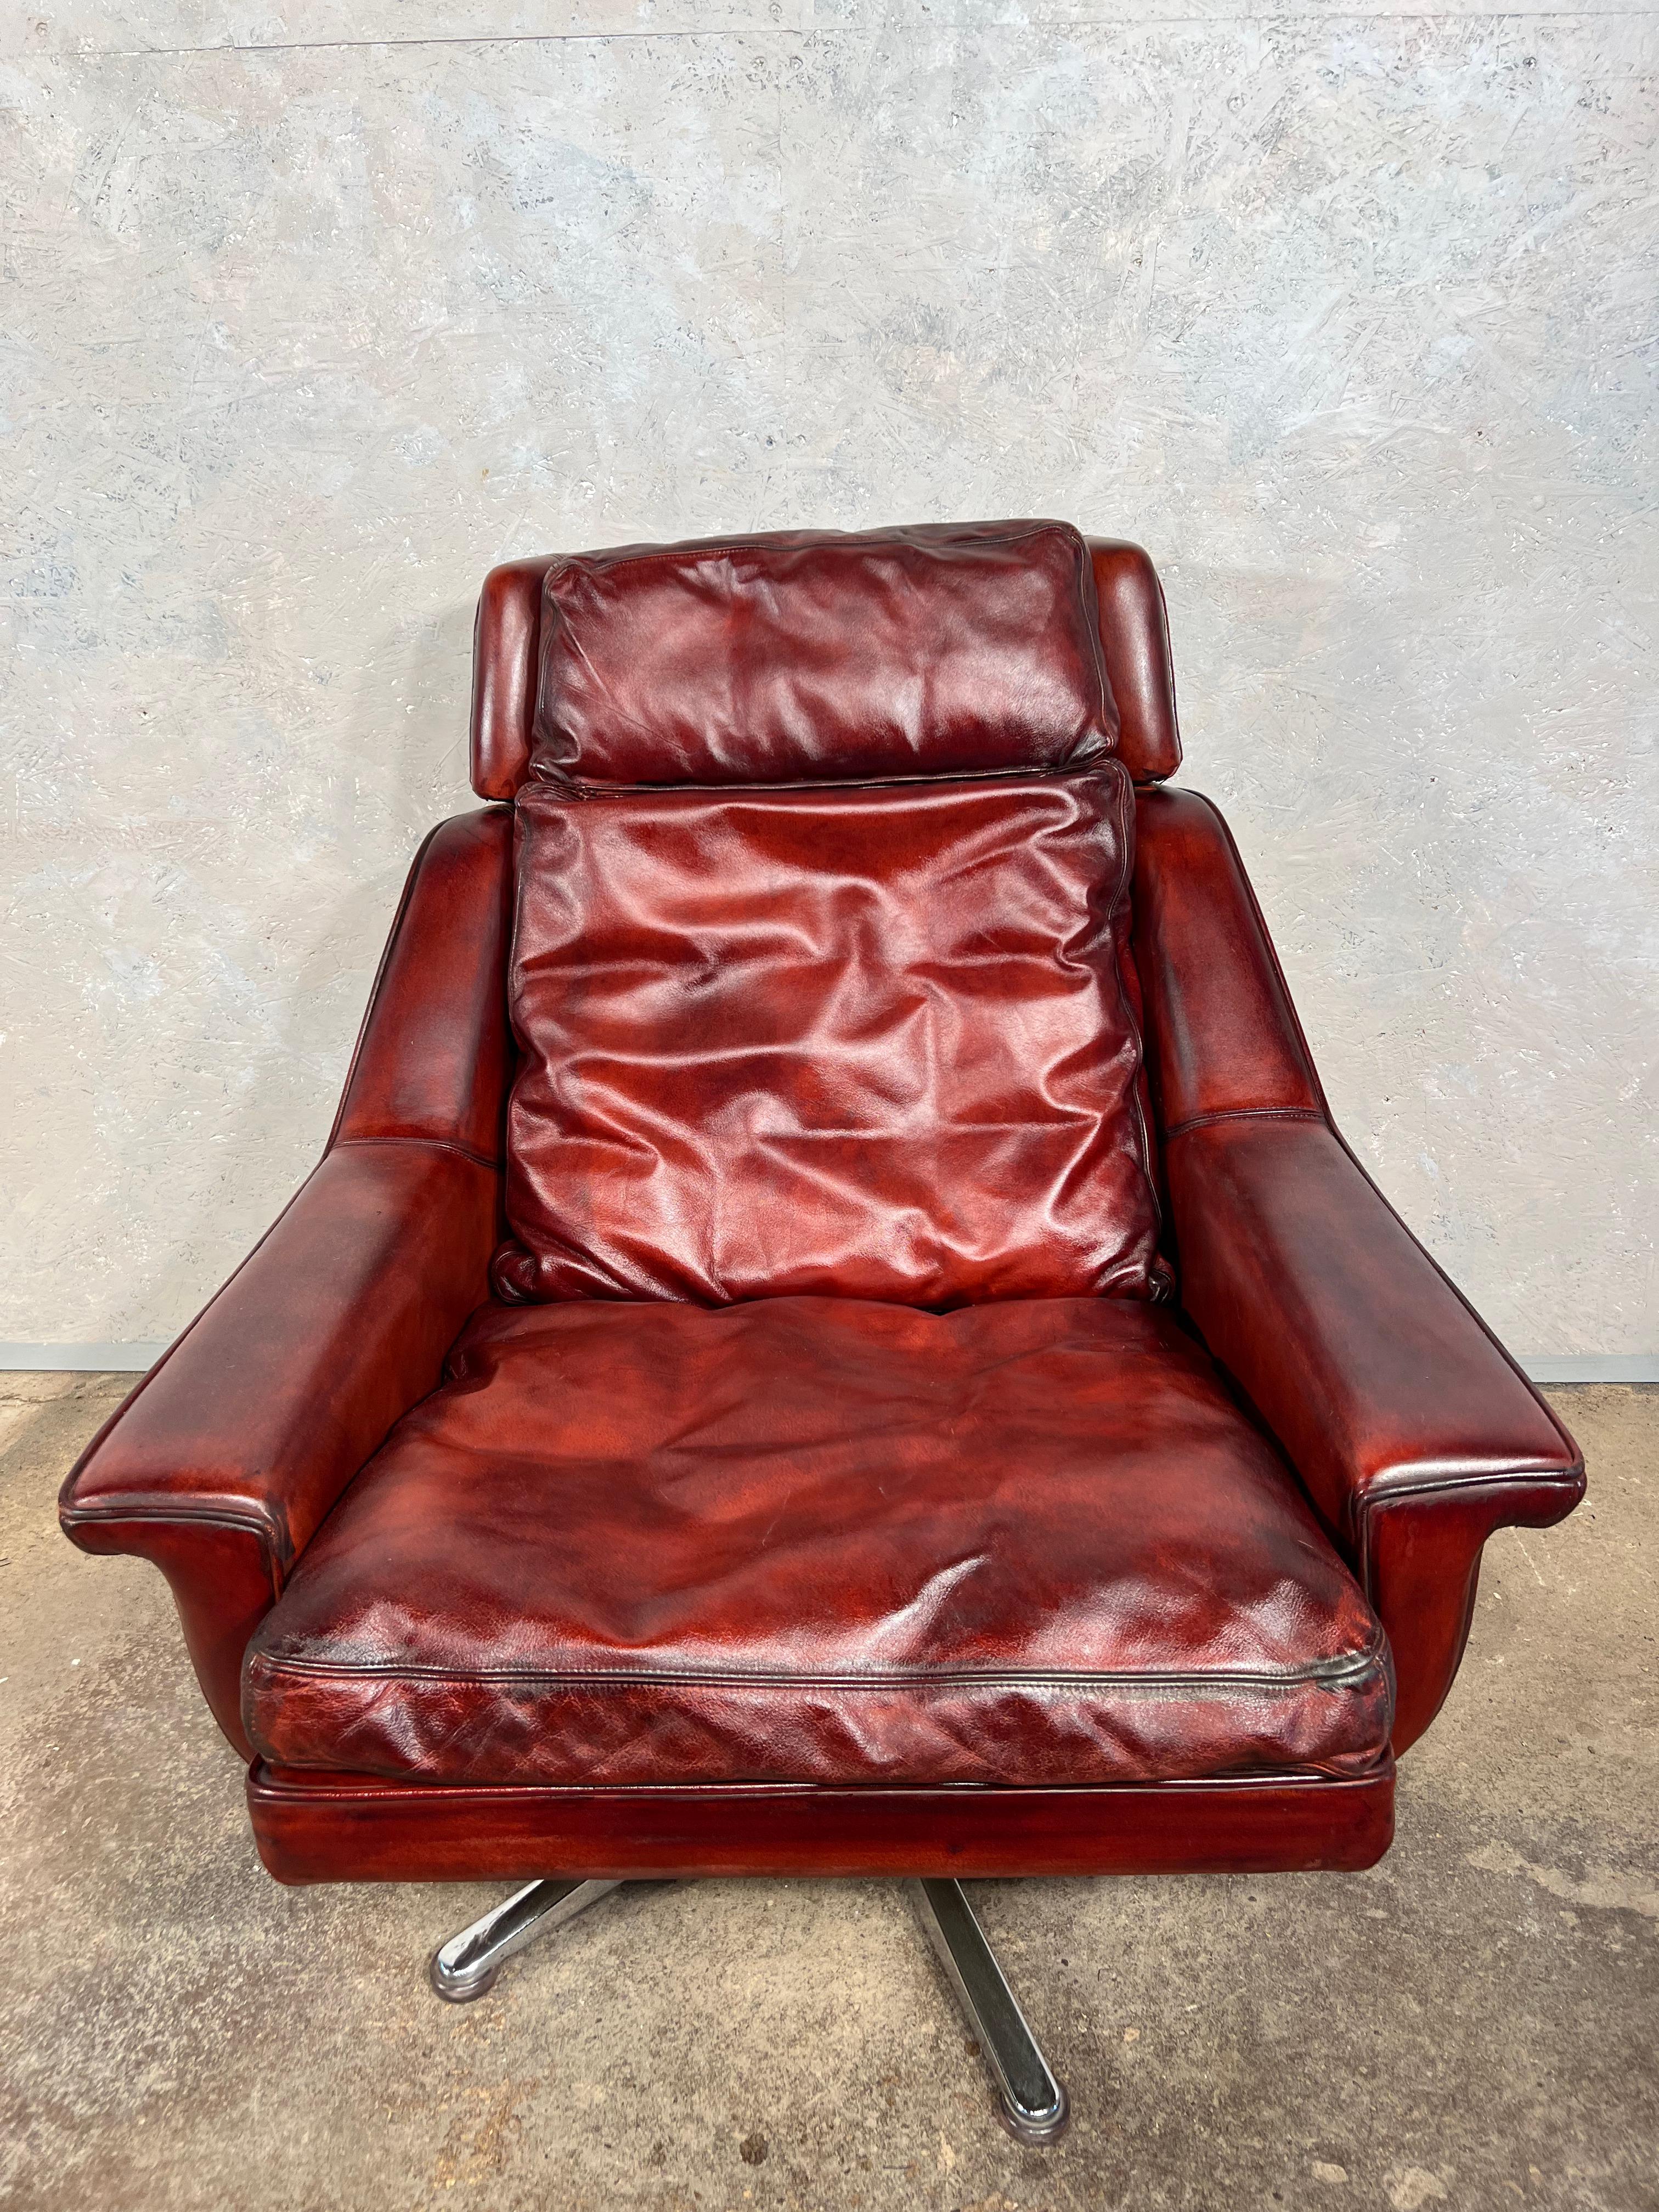 Superb Vintage 1970 ESA Danish Leather Swivel chair Model 802

Great design, lines and shape, very comfortable to sit in, beautiful patinated deep chestnut hand dyed colour and finish. Resting on splayed chrome swivel base.

Viewings welcome at